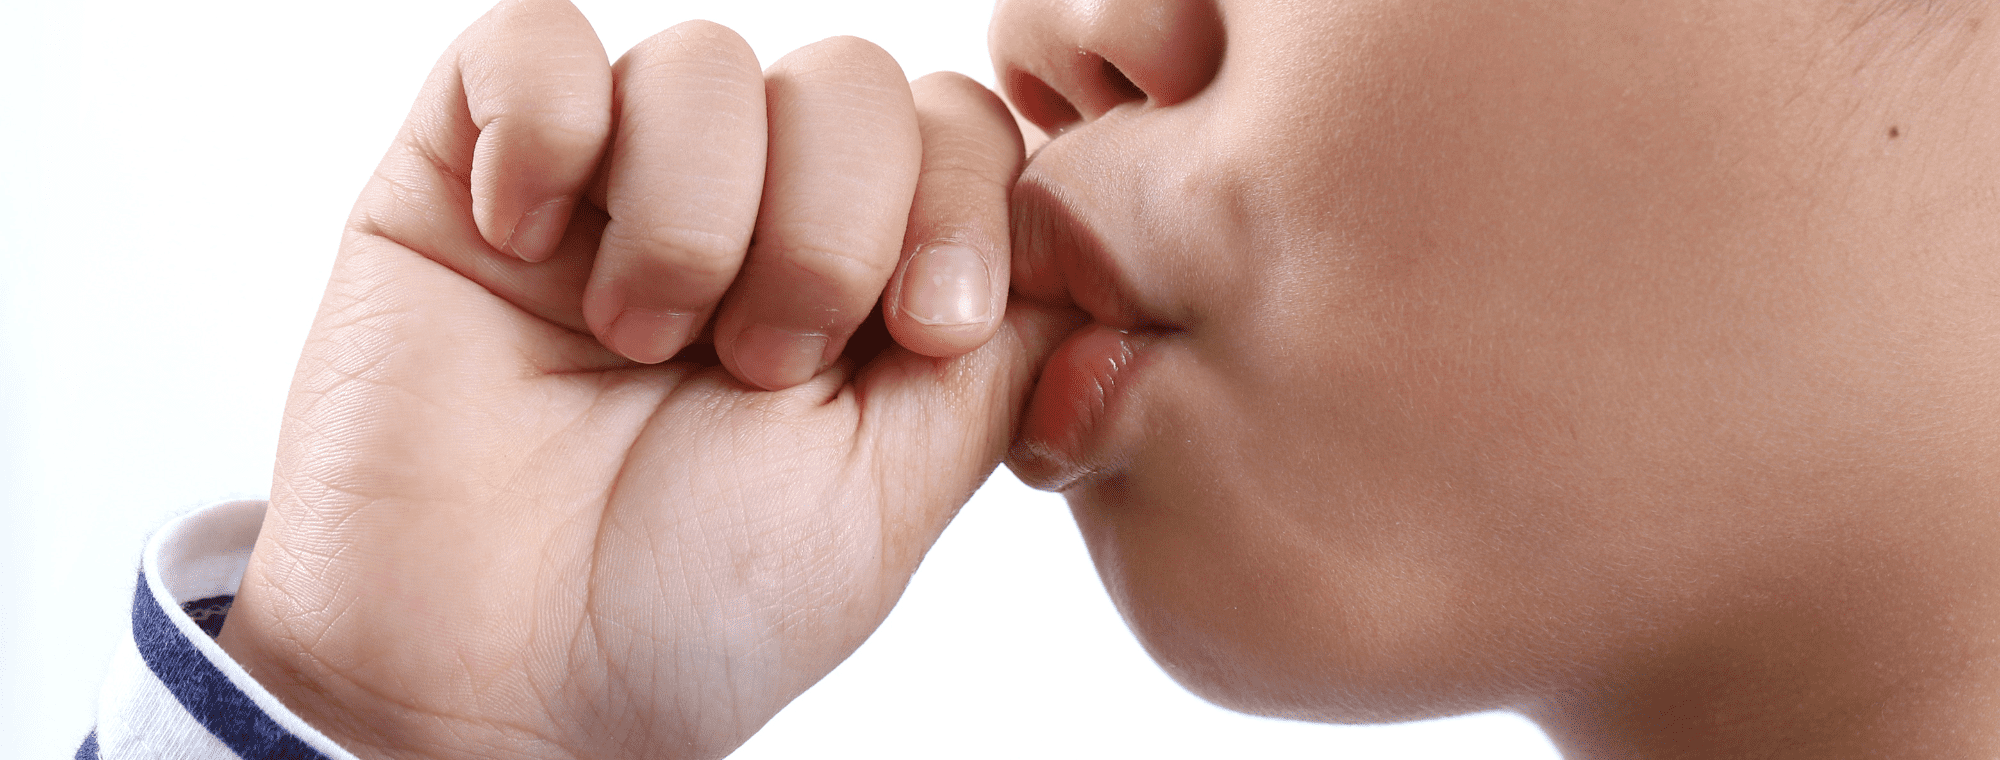 Why You Should STOP Thumb Sucking Immediately